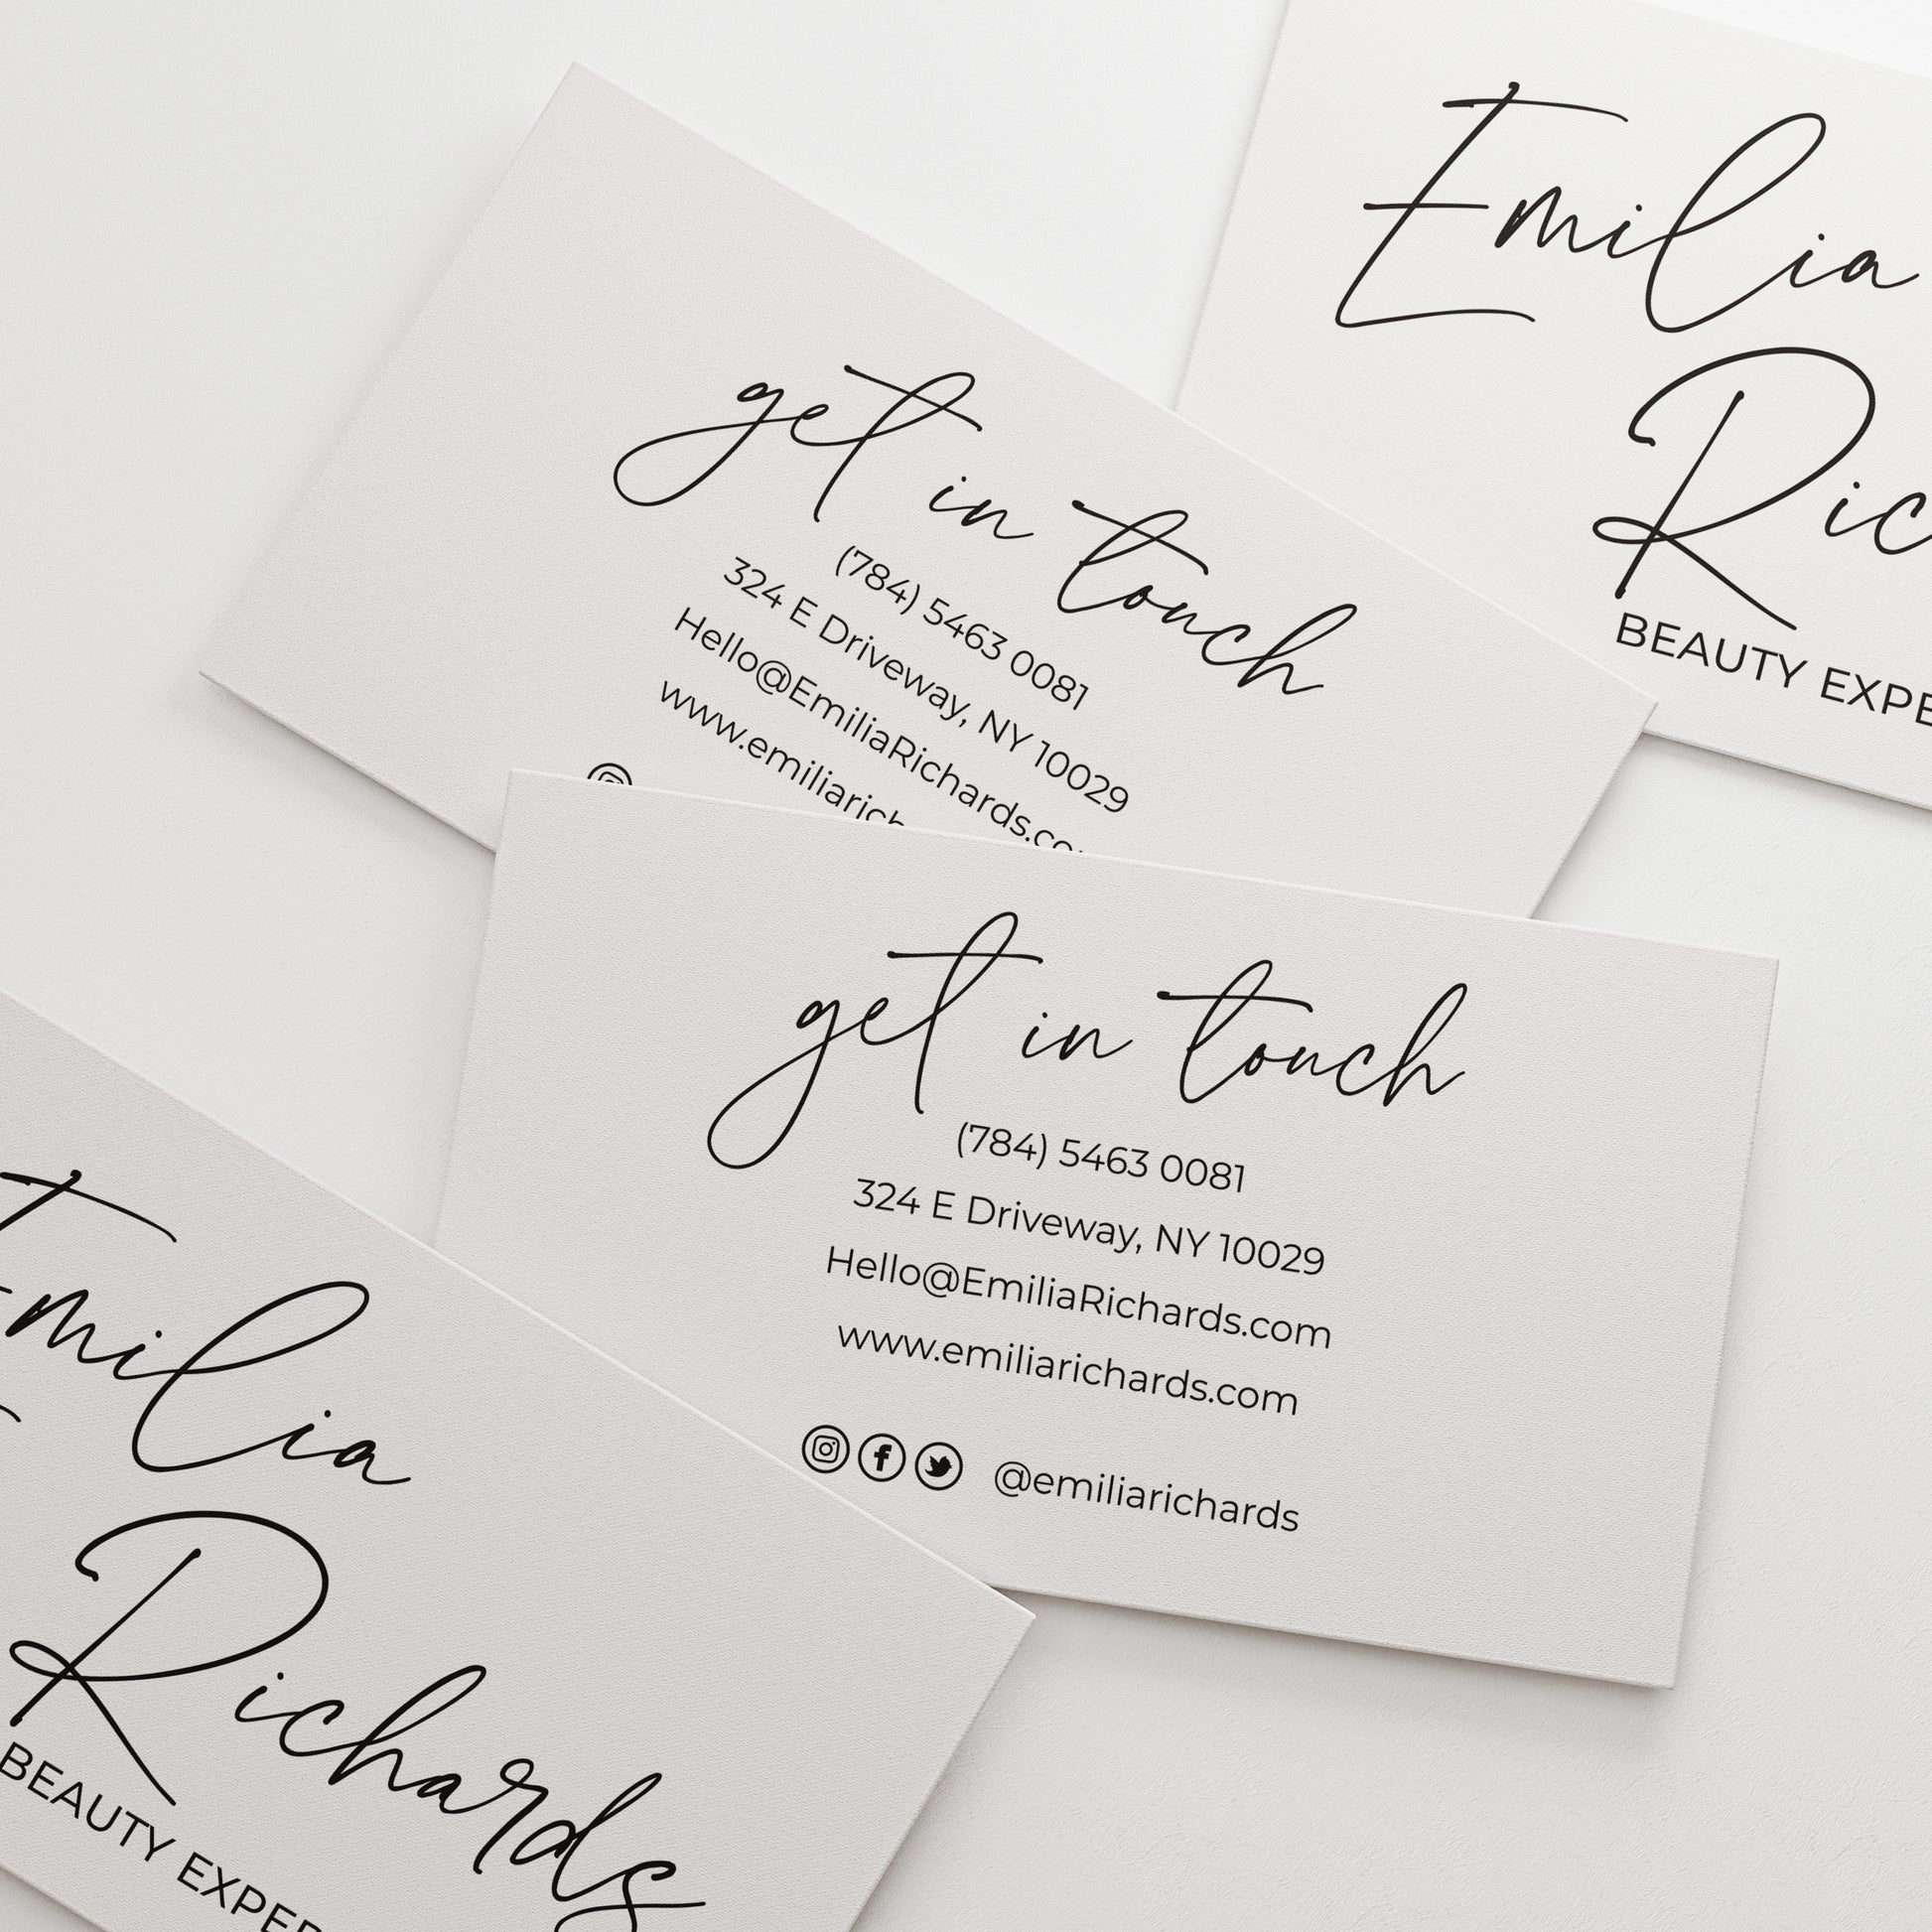 Personalized Business Cards - Modern Sophistication with Captivating Black and White Design - XOXOKristen